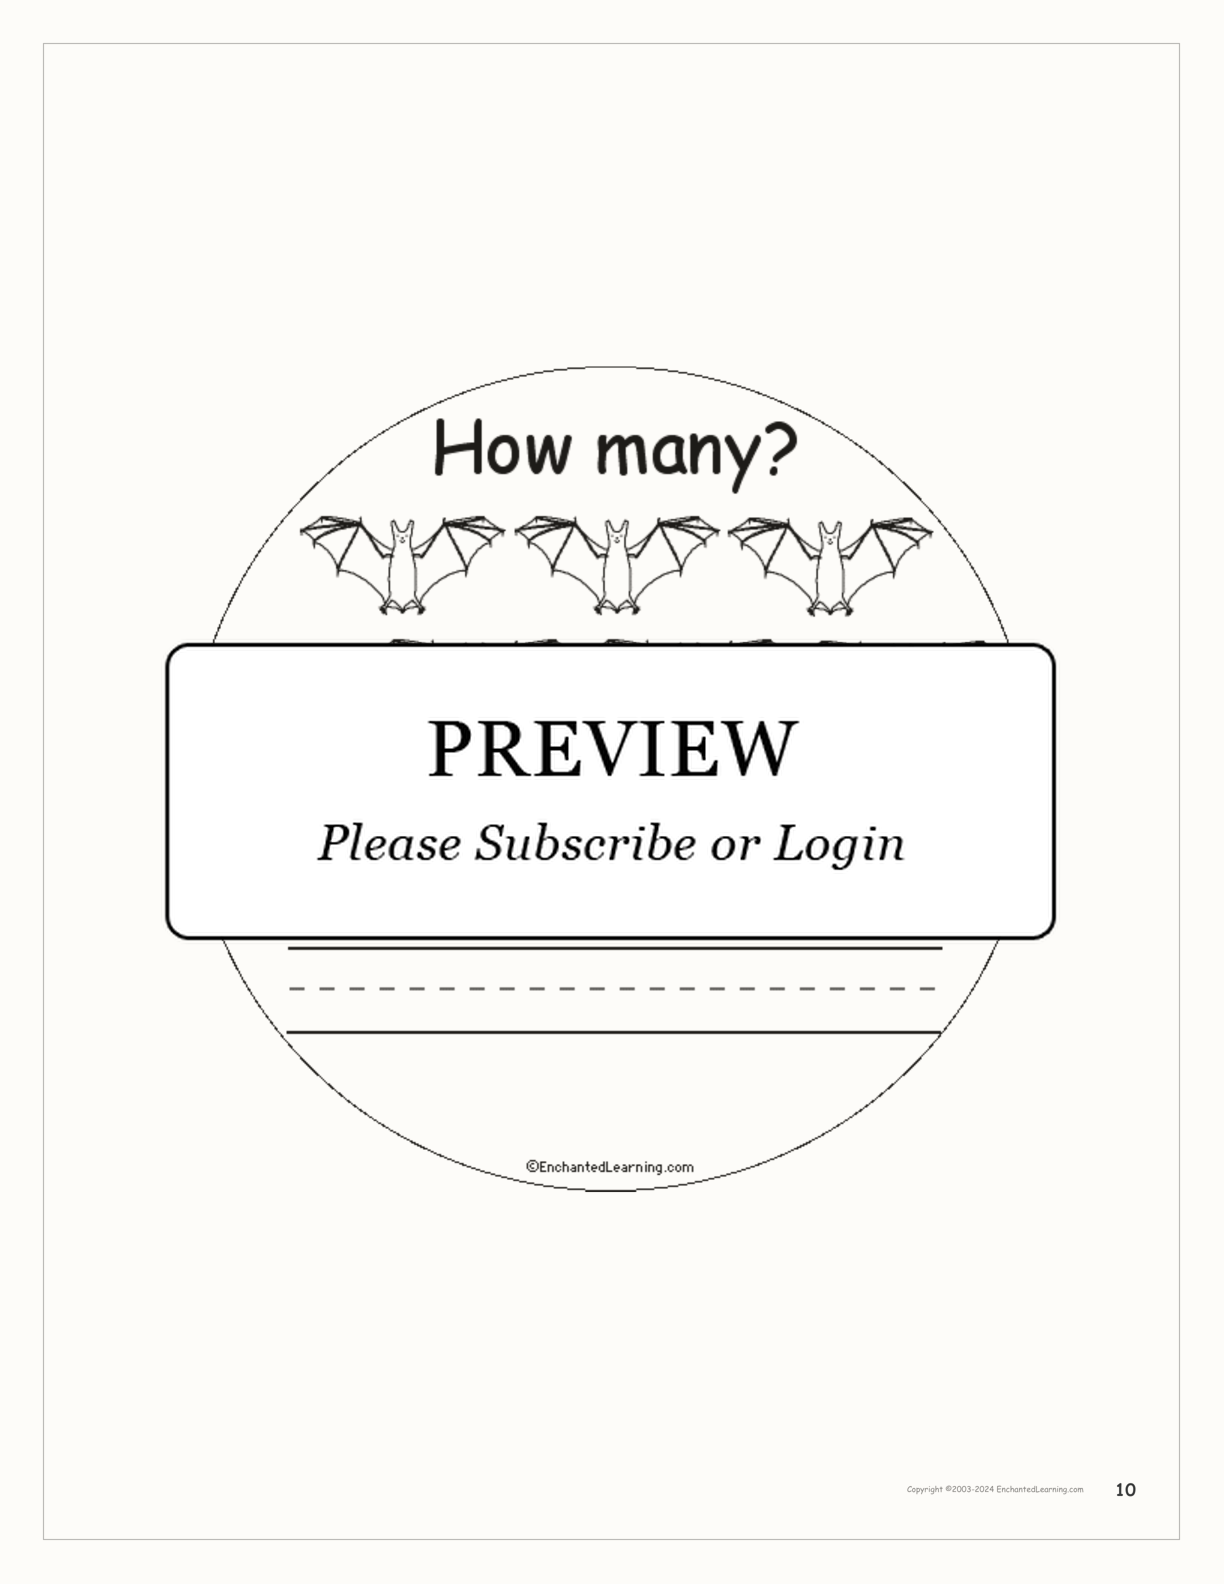 How Many Bats? Book for Early Readers interactive printout page 10